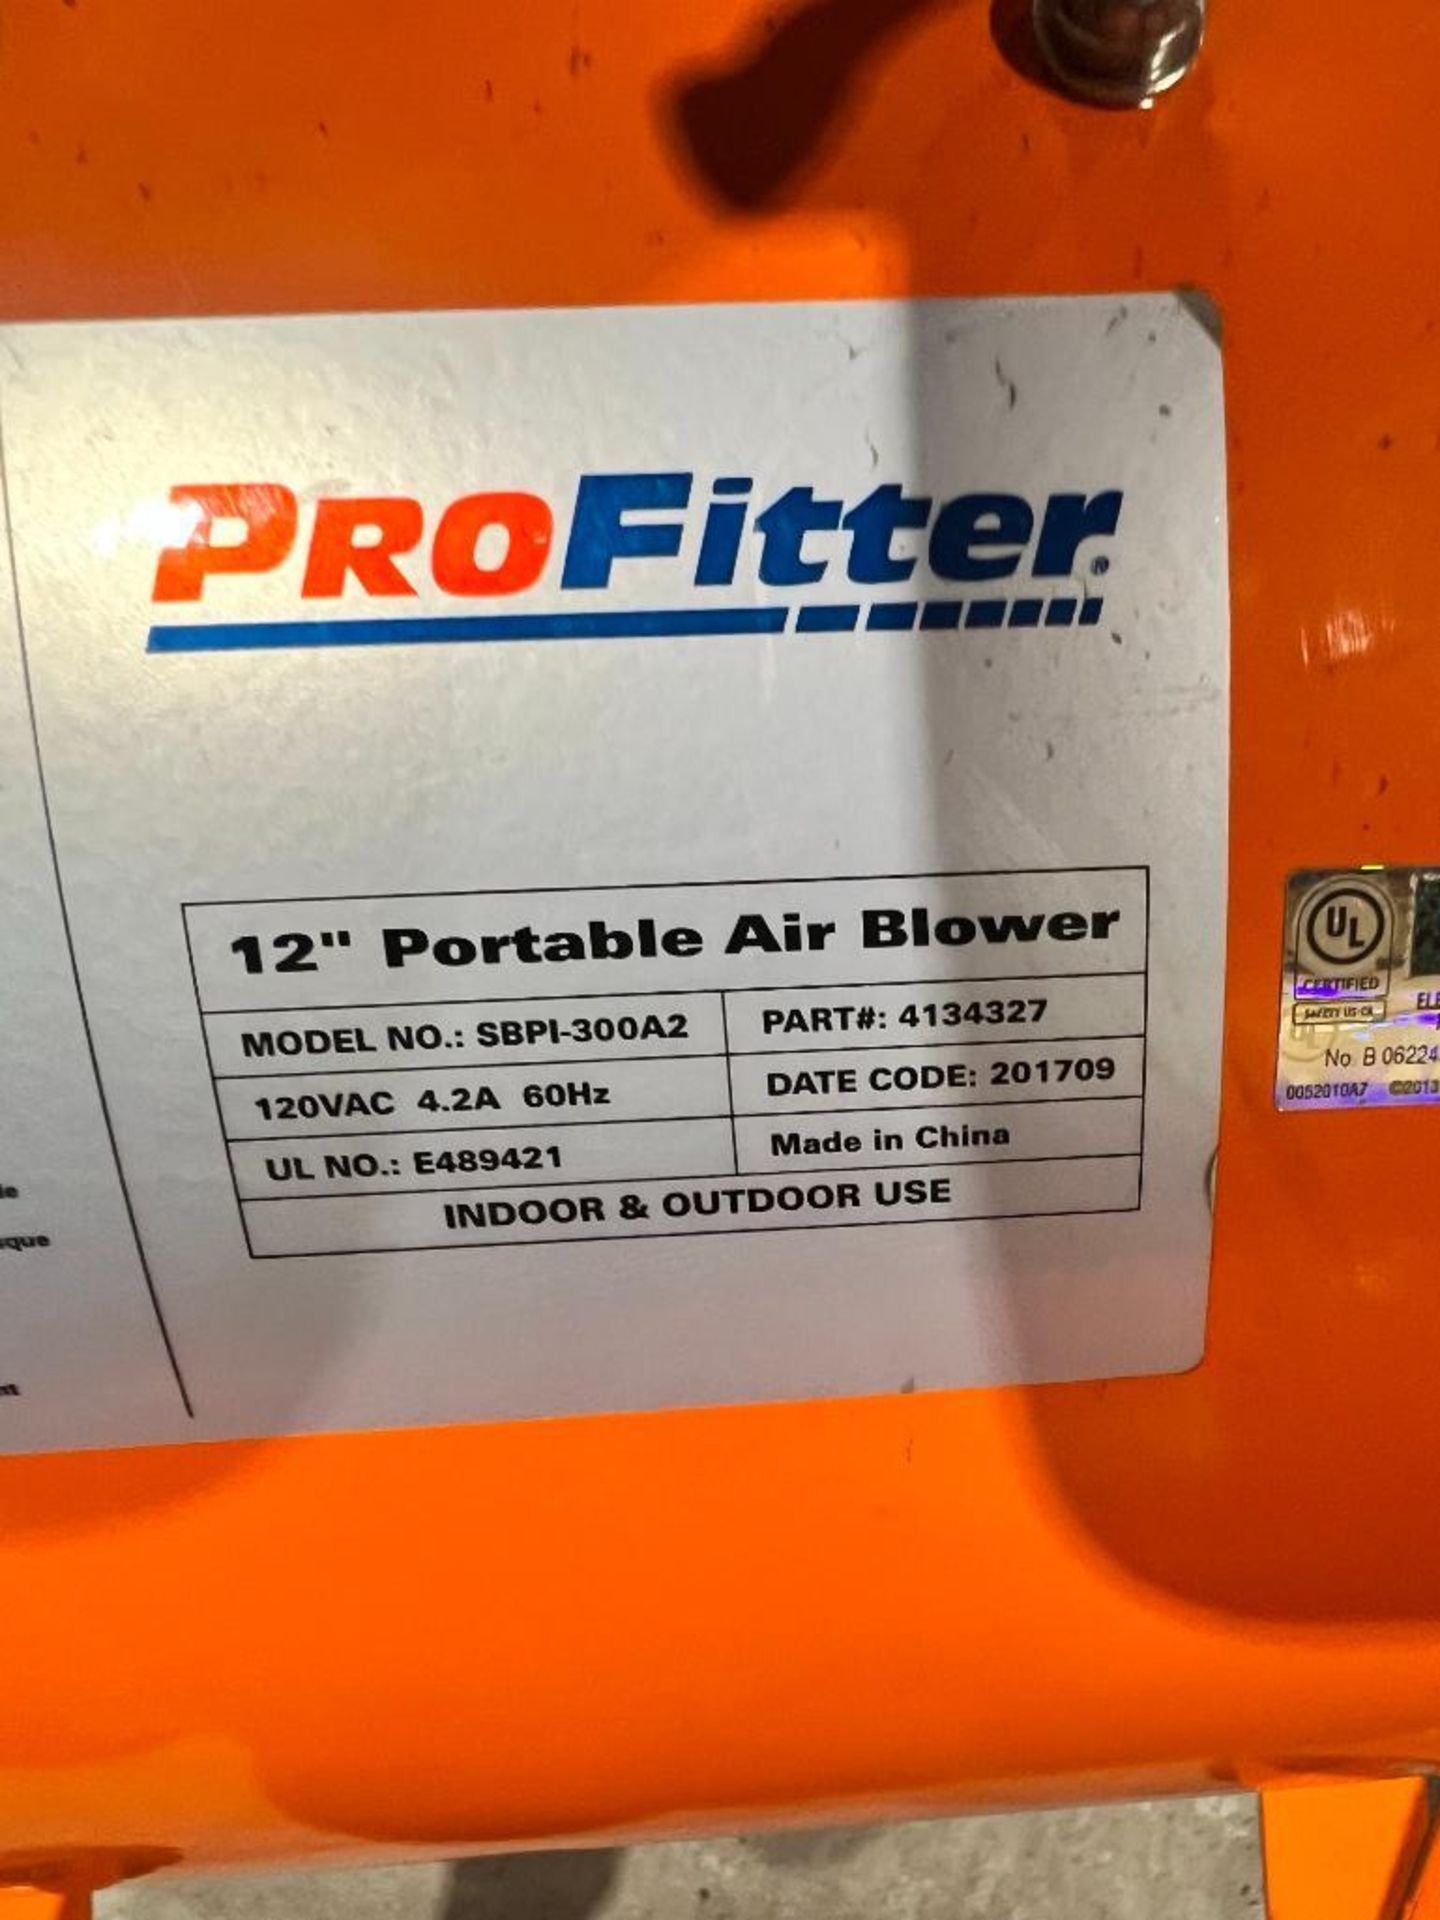 Pro Fitter 12" Portable Air Blower - Image 2 of 2